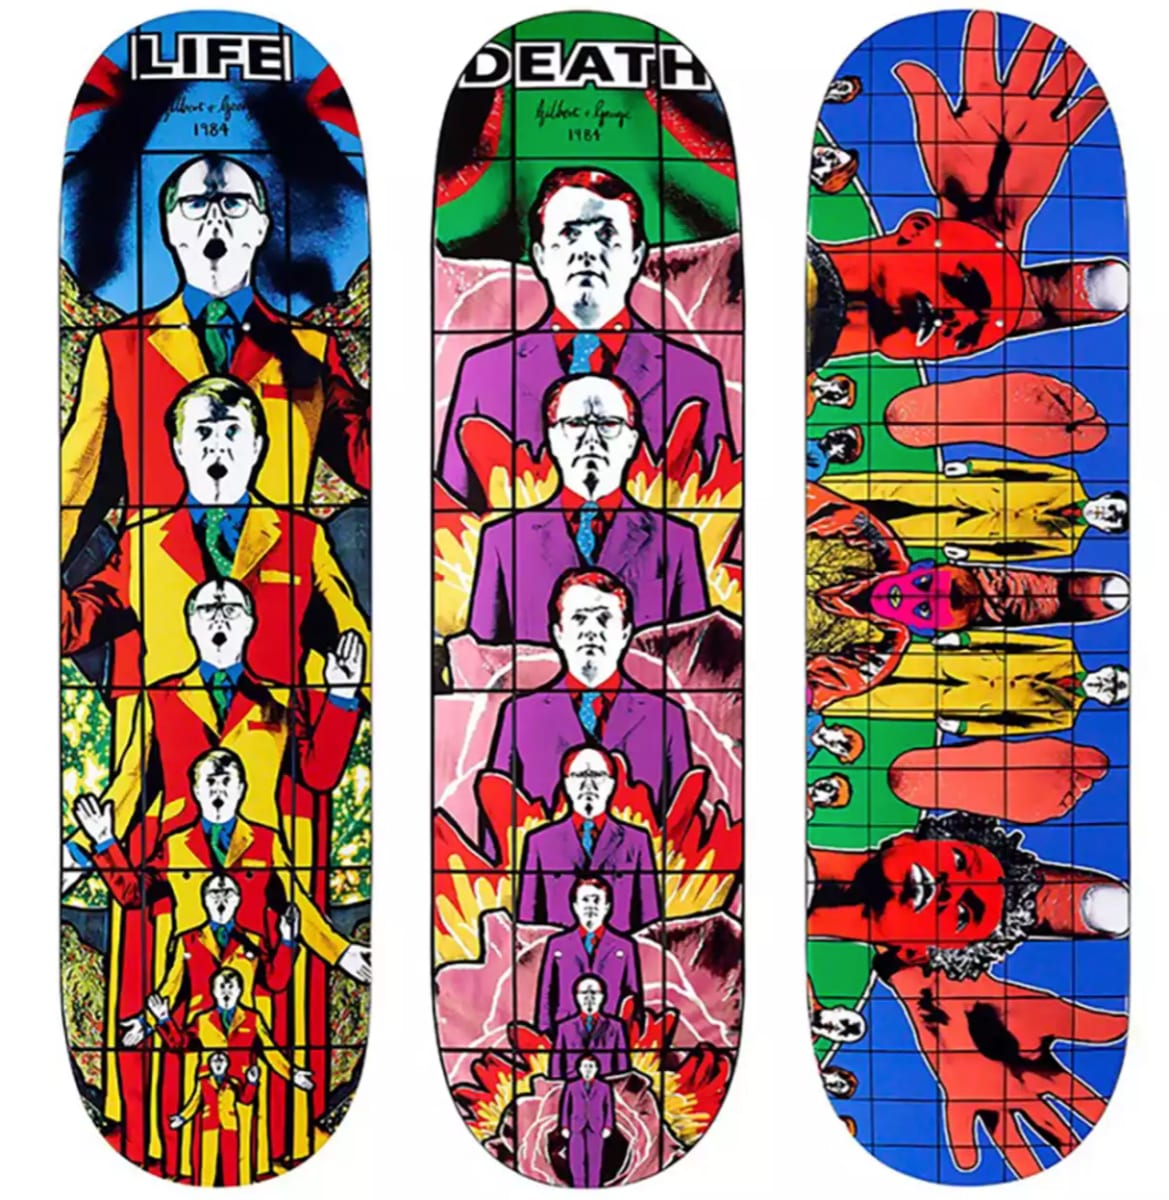 Supreme x Gilbert & George Triptych by Gilbert & George 